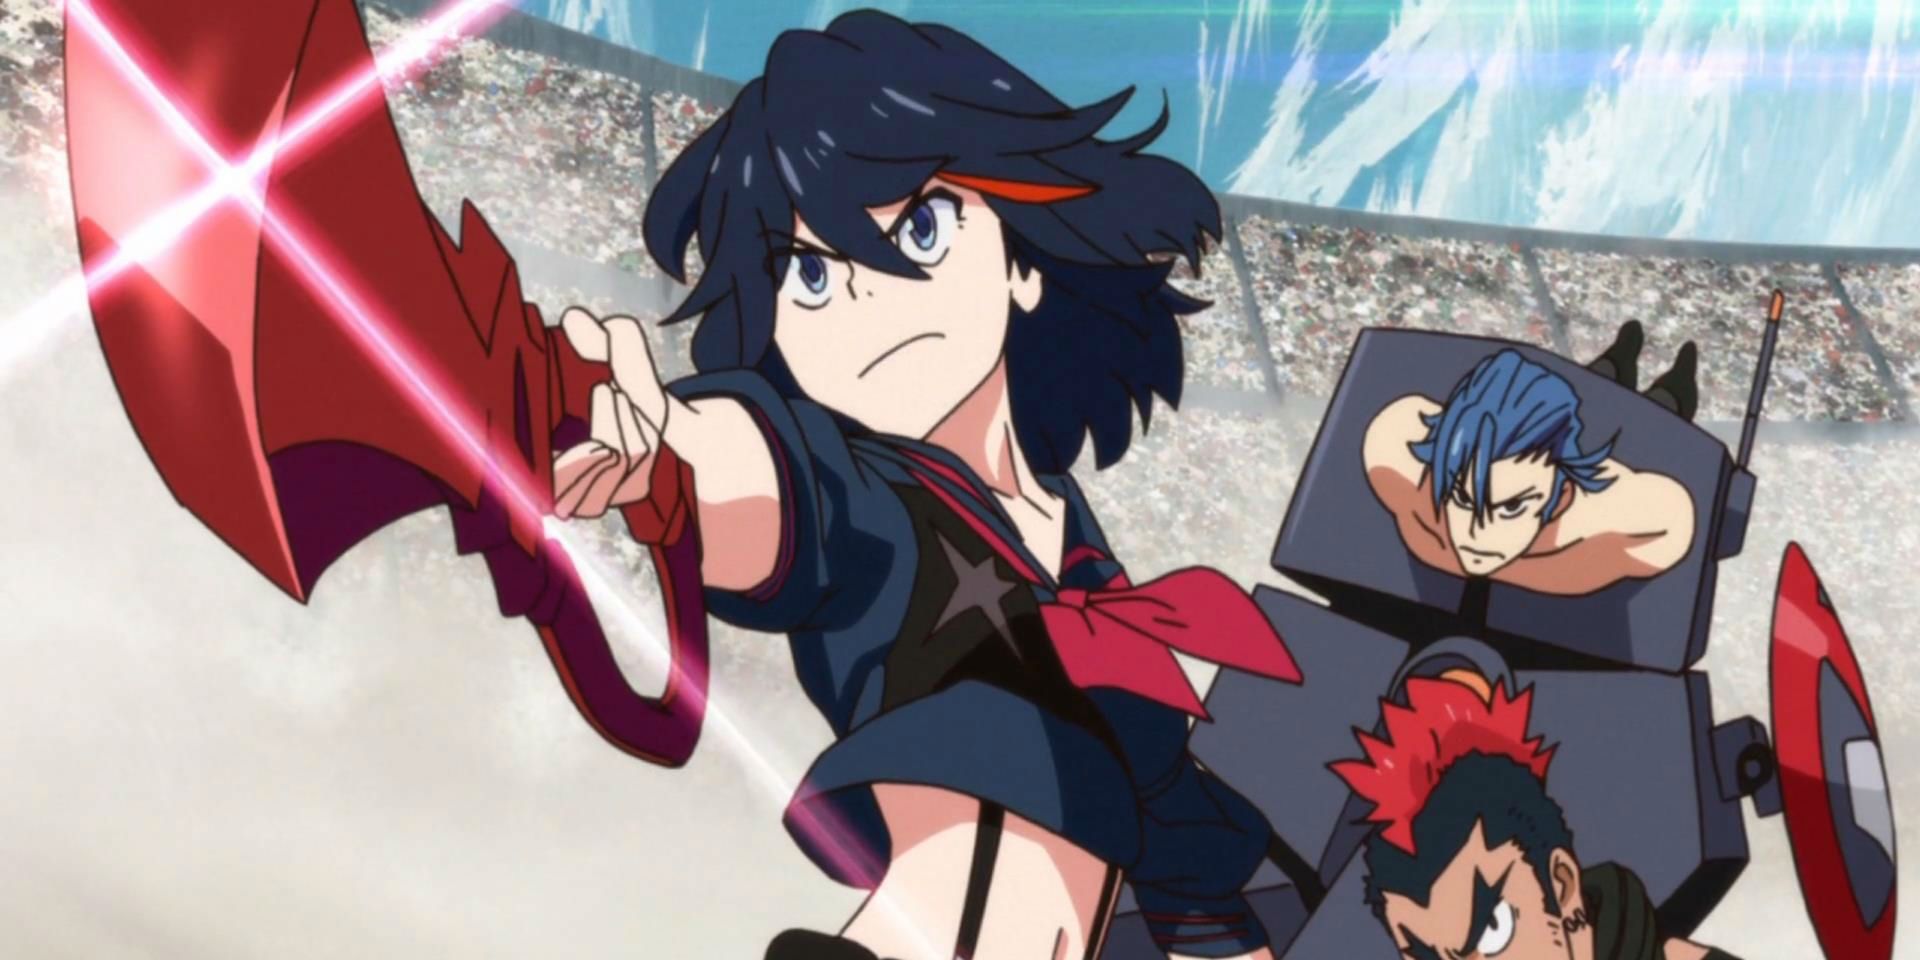 Kill La Kill screen cap featuring Ryuko holding her scissor blade up in a crowded arena space.